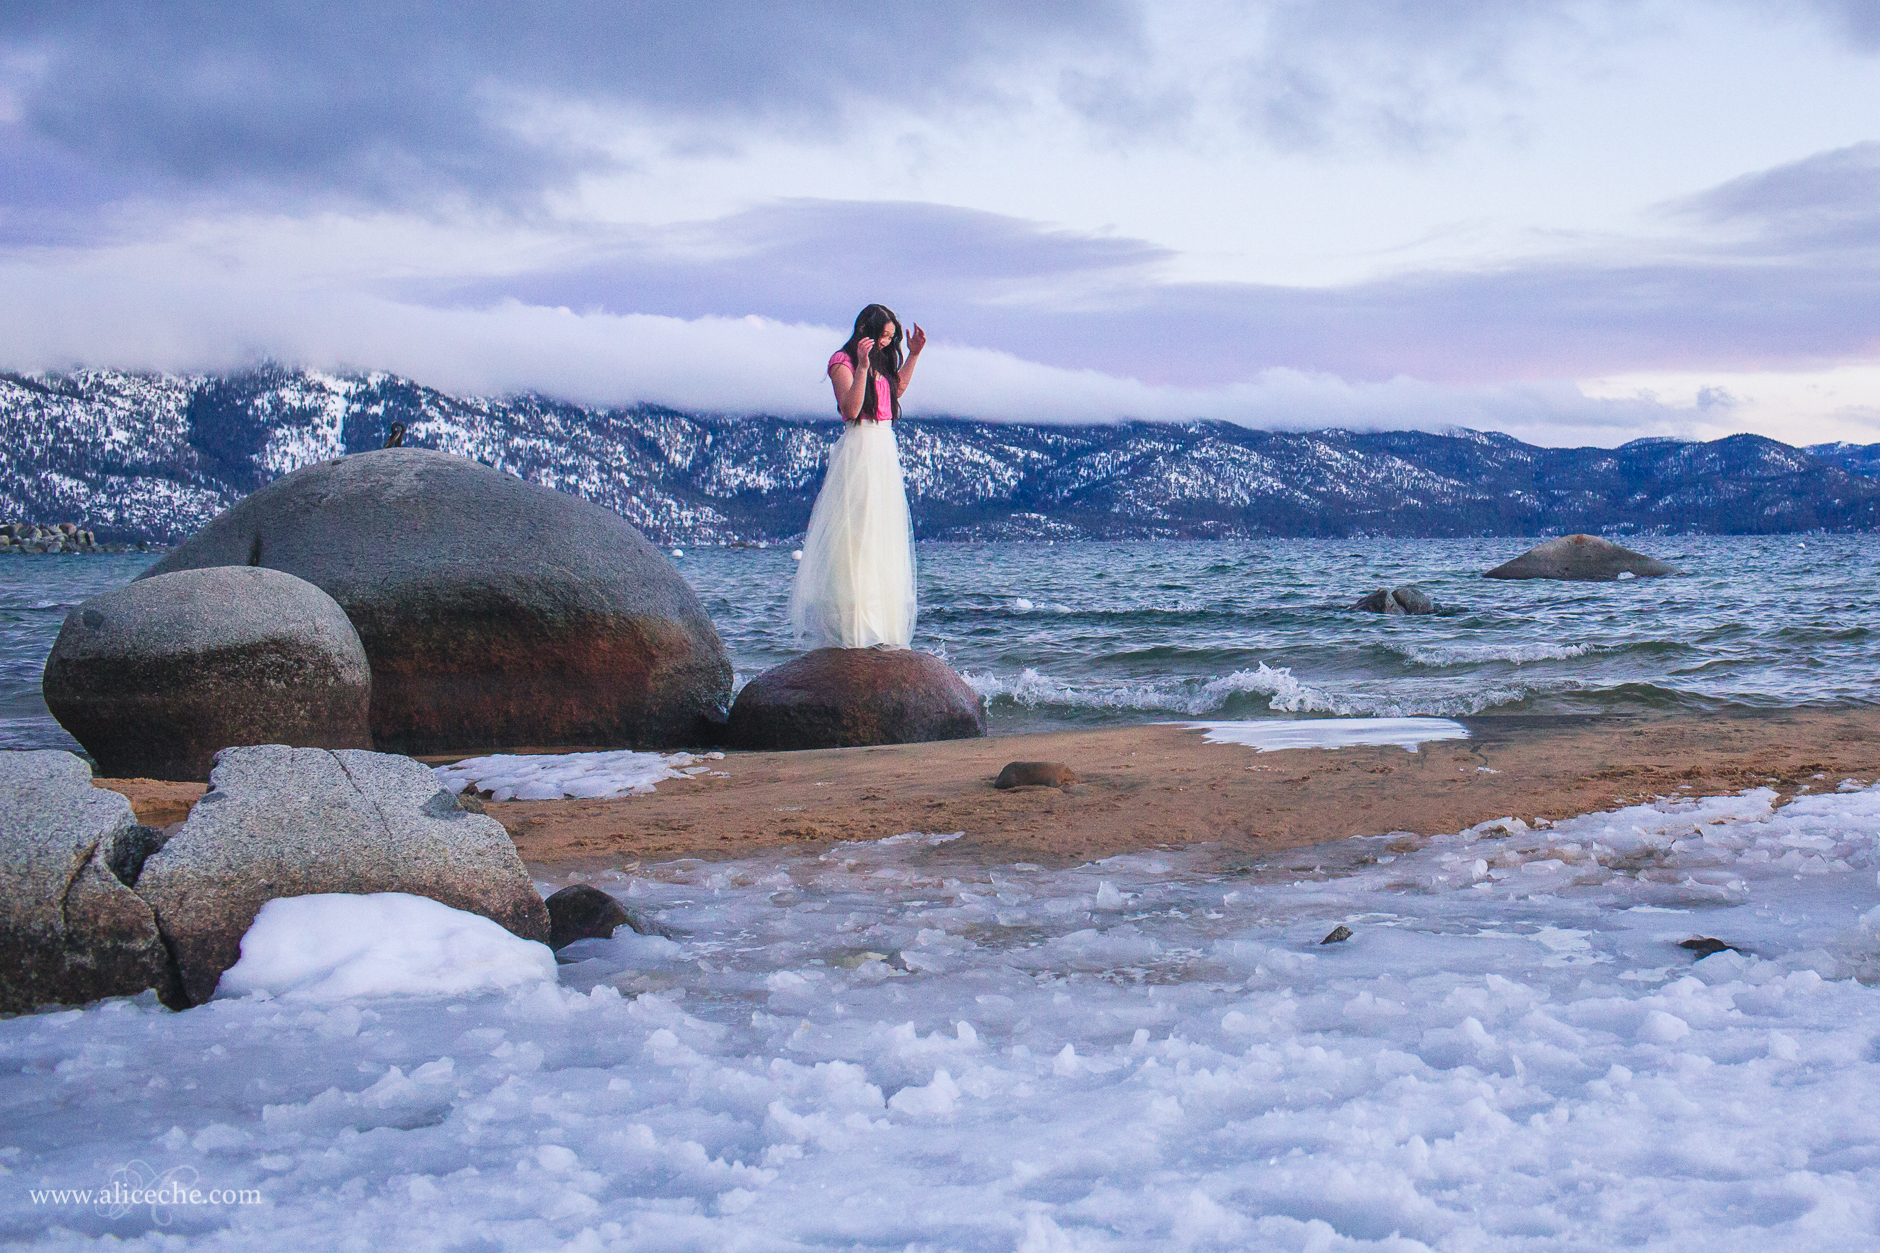 alice-che-photography-lake-tahoe-self-portrait-sunset-girl-in-tulle-skirt-surprised-by-wave